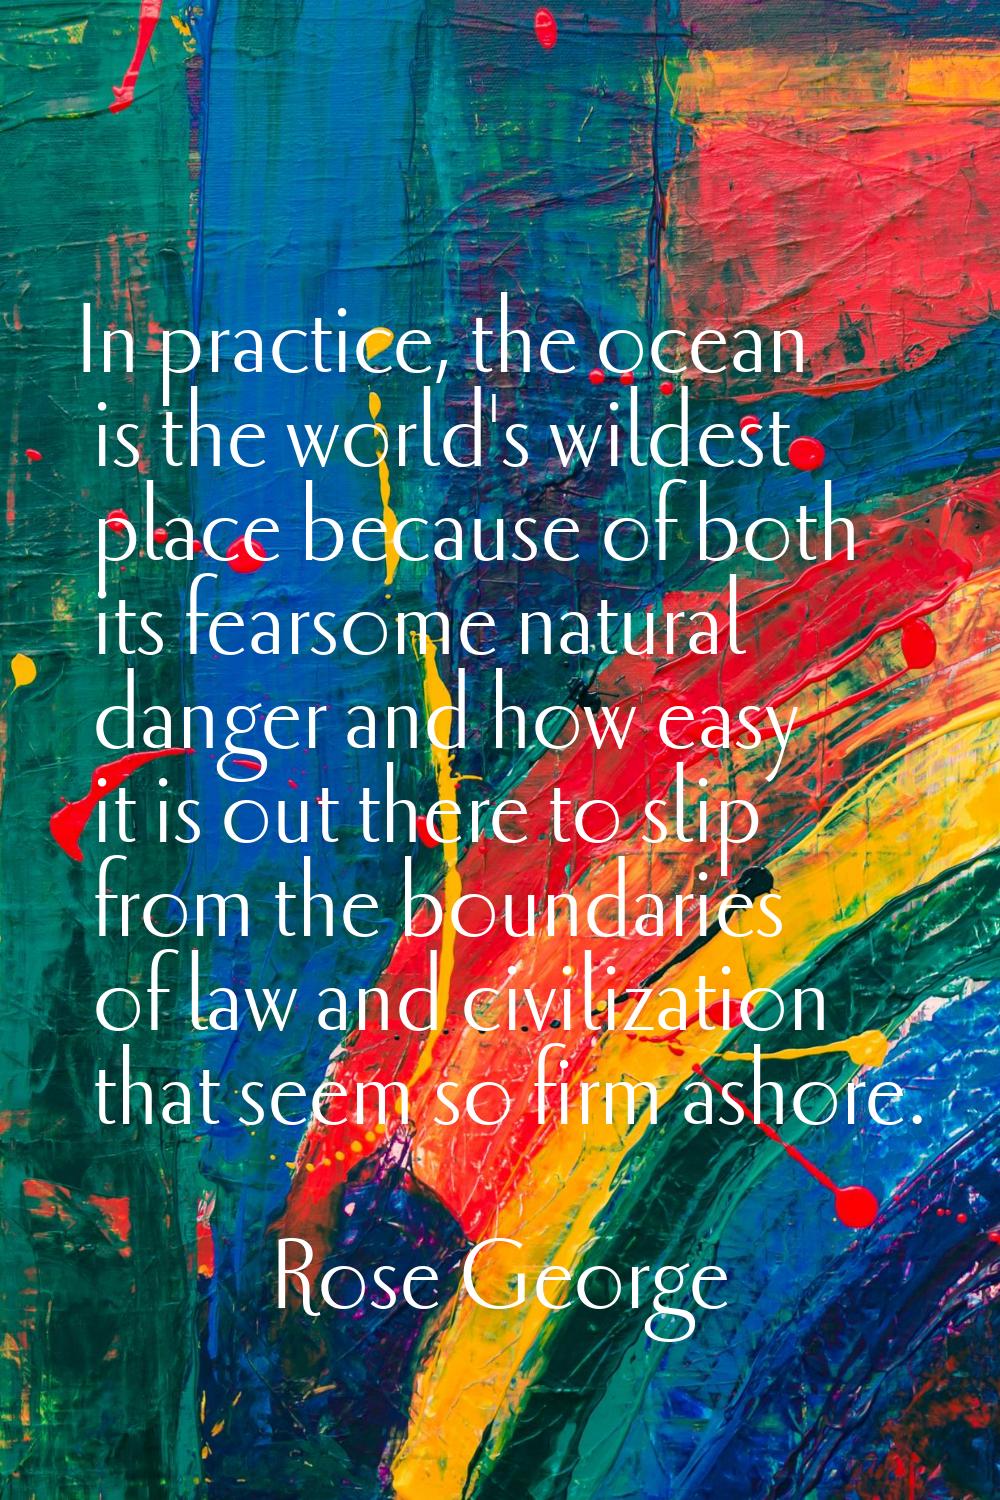 In practice, the ocean is the world's wildest place because of both its fearsome natural danger and